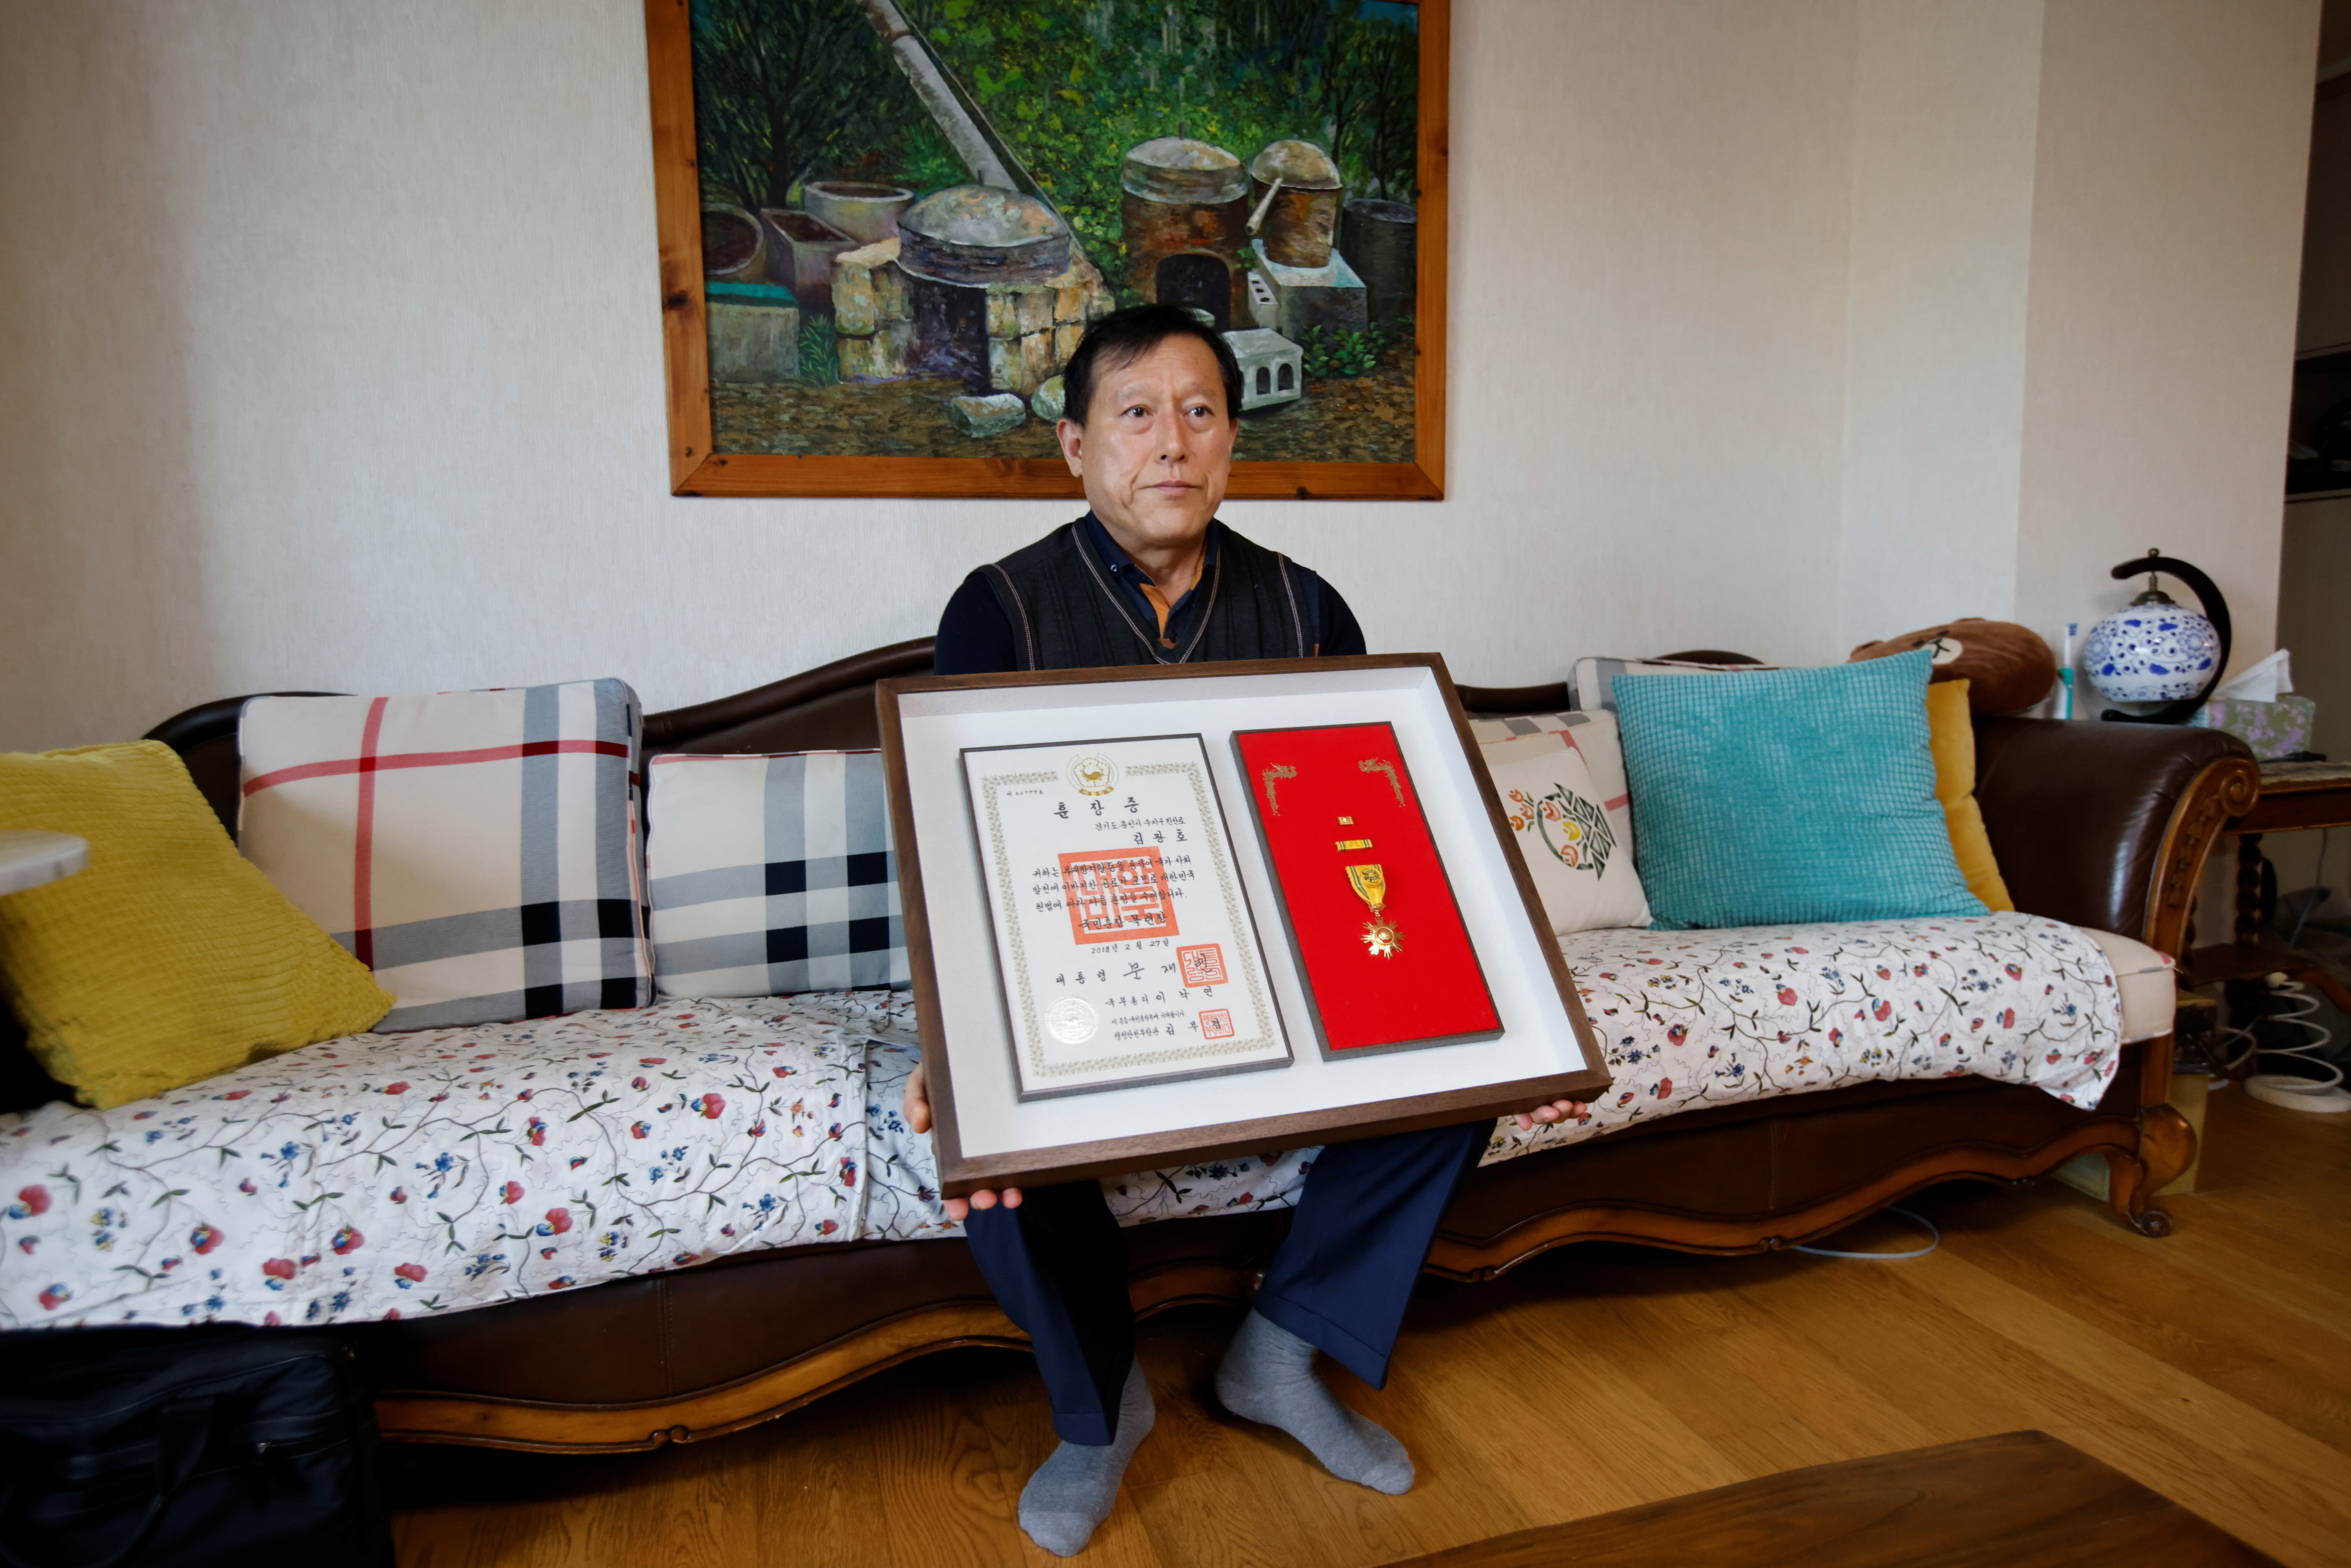 Kim Gwang-ho, a former Hyundai Motor engineer, poses with a presidential certificate recognizing his anti-corruption work at his home in Seoul